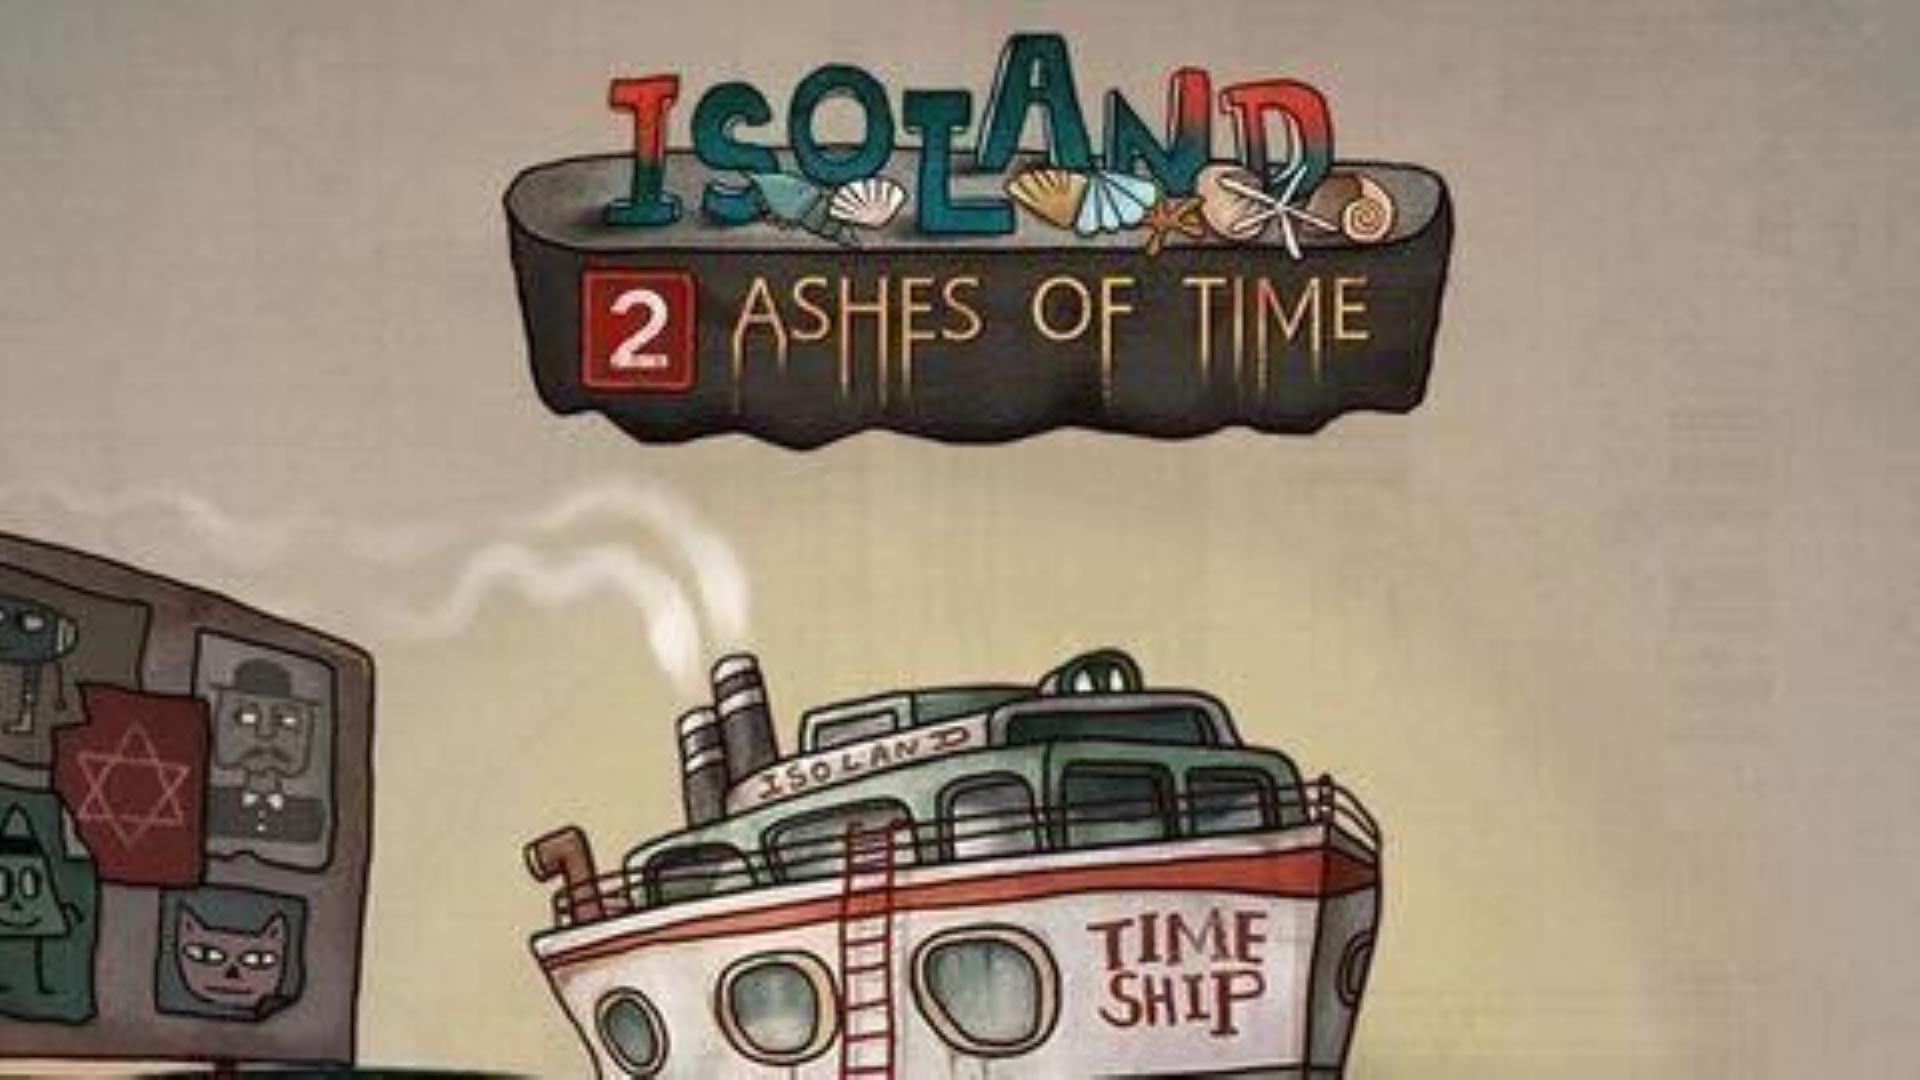 Banner of Isoland 2: Ashes of Time 